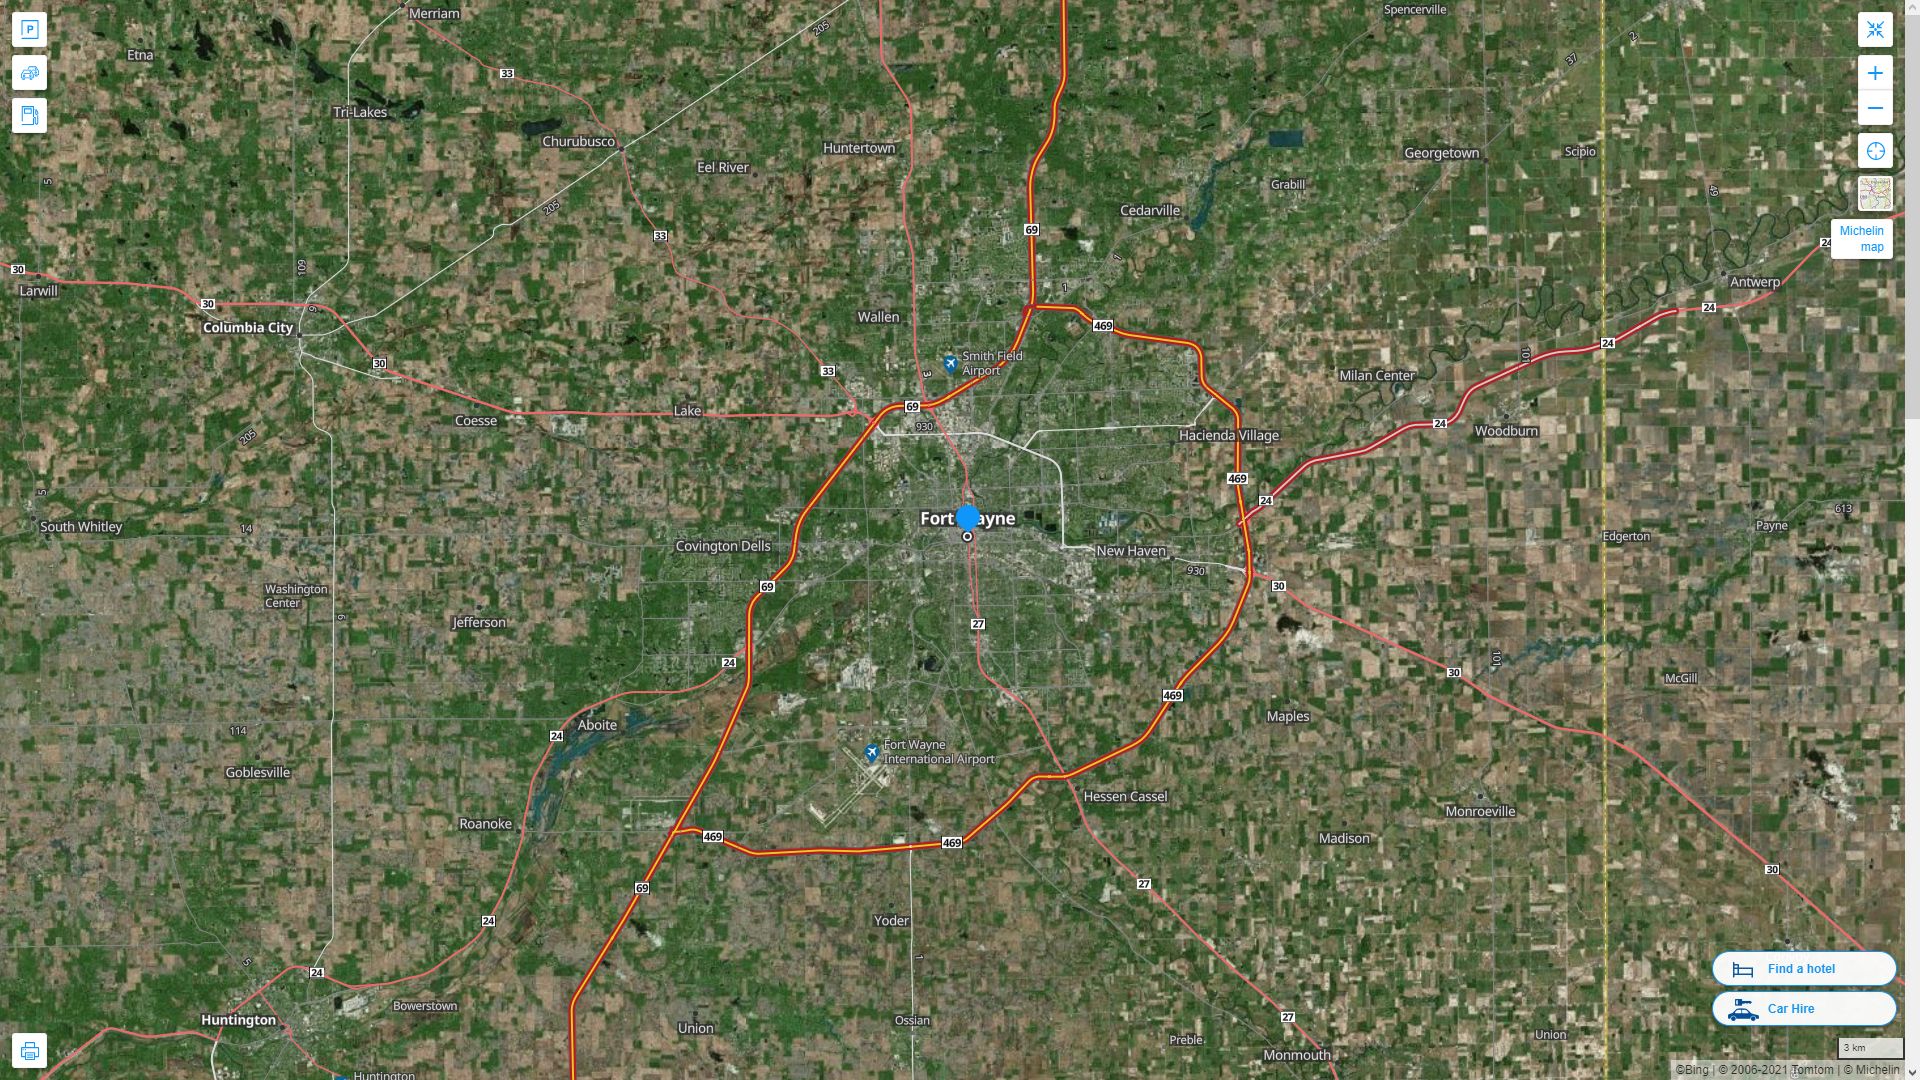 Fort Wayne Indiana Highway and Road Map with Satellite View